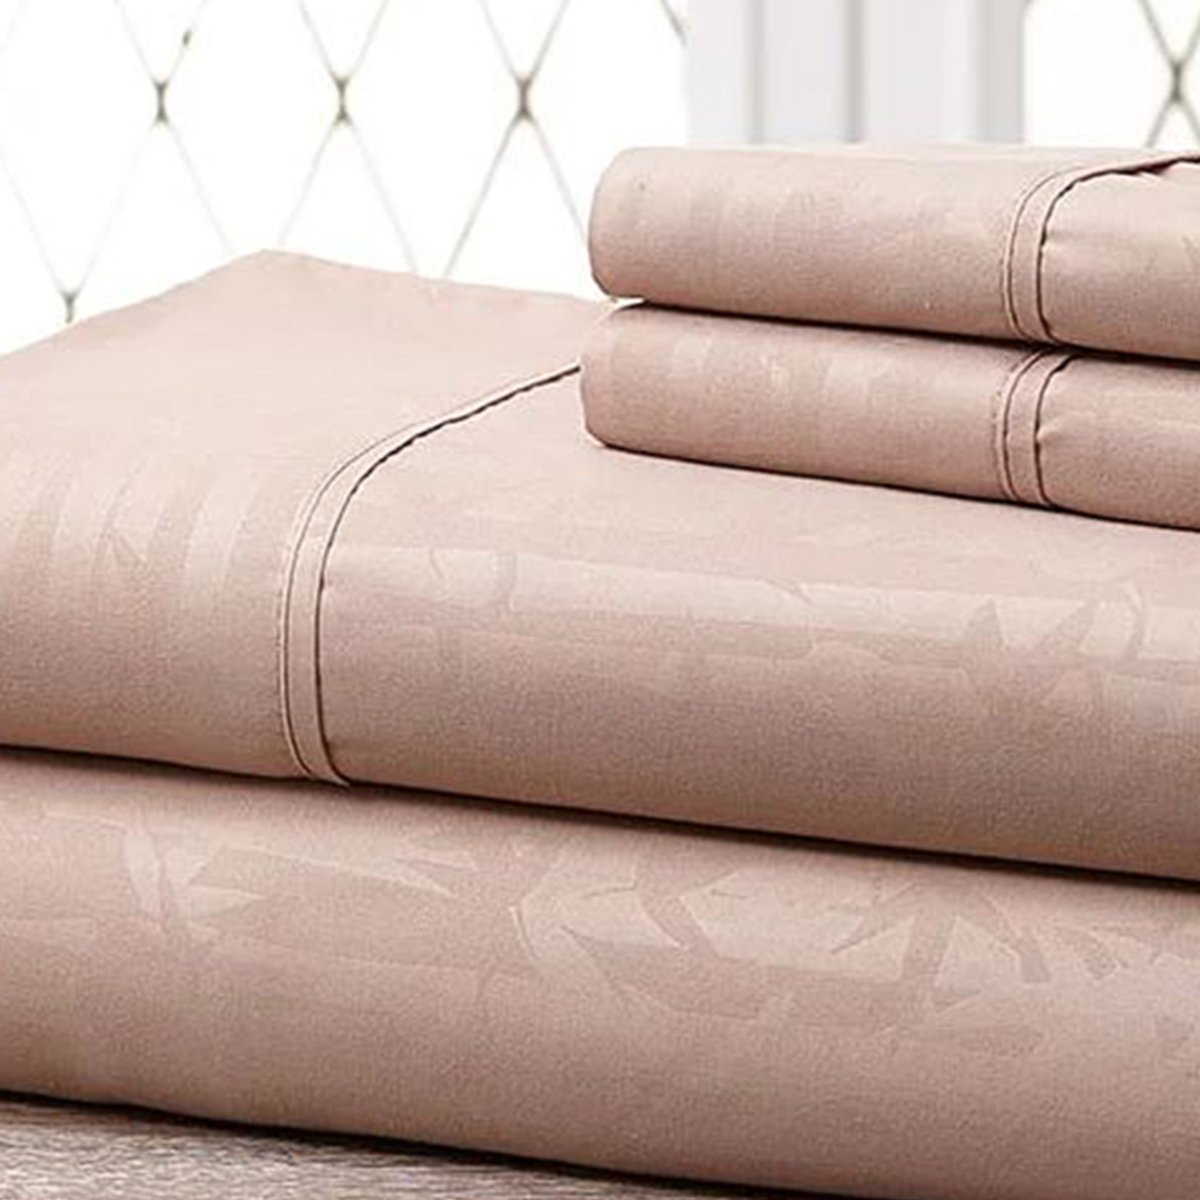 Super-soft 1600 Series Bamboo Embossed Bed Sheet, Taupe - Queen, 4 Piece